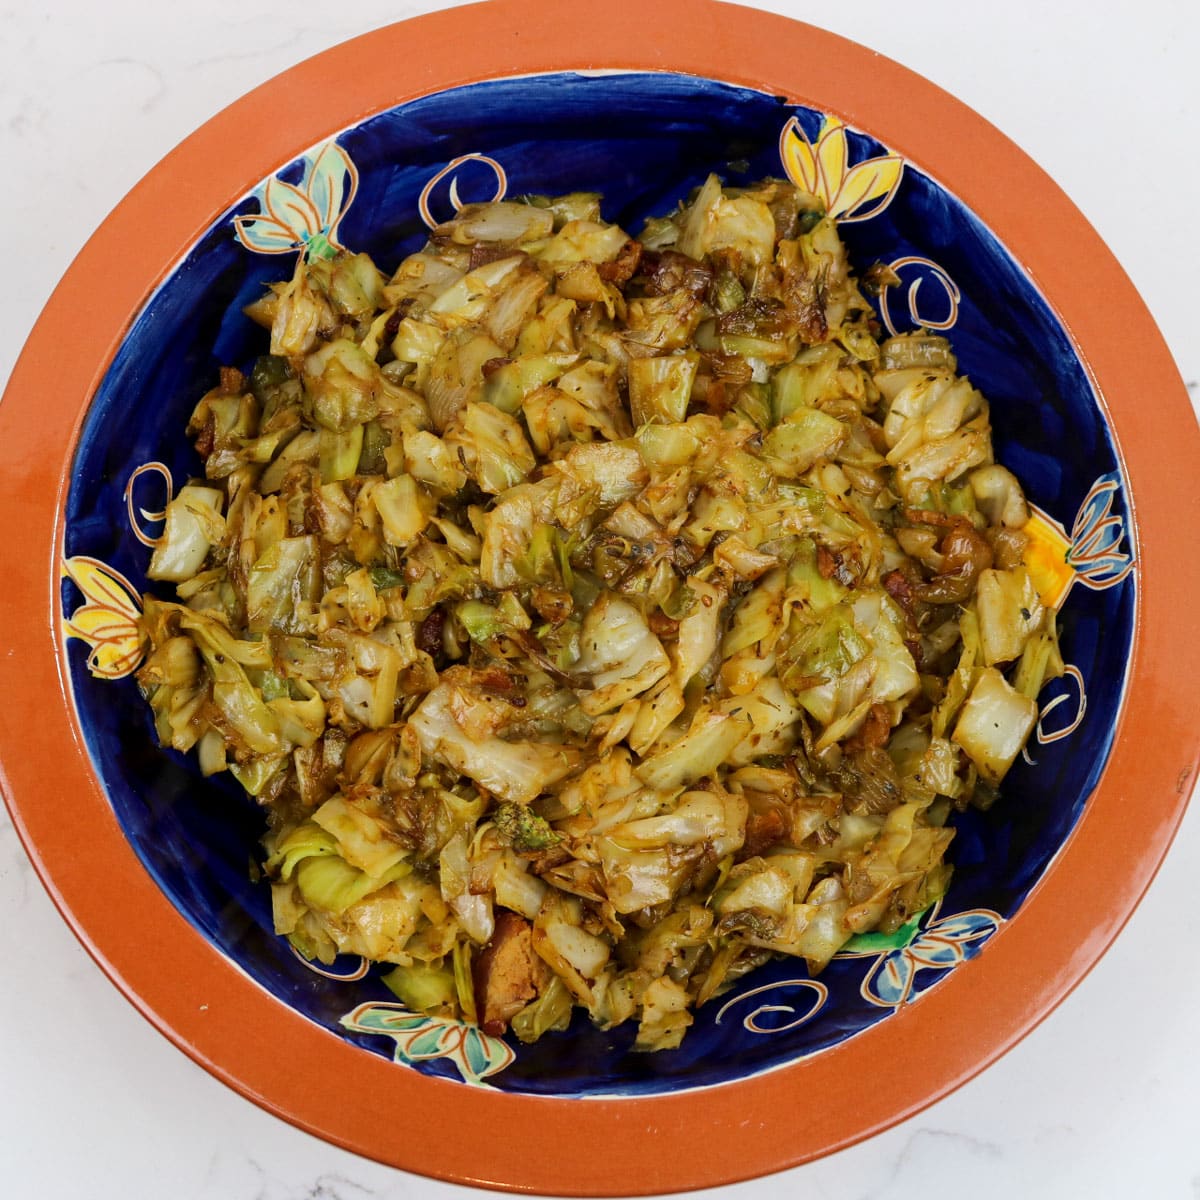 fried cabbage with bacon and cane syrup in a decorative bowl